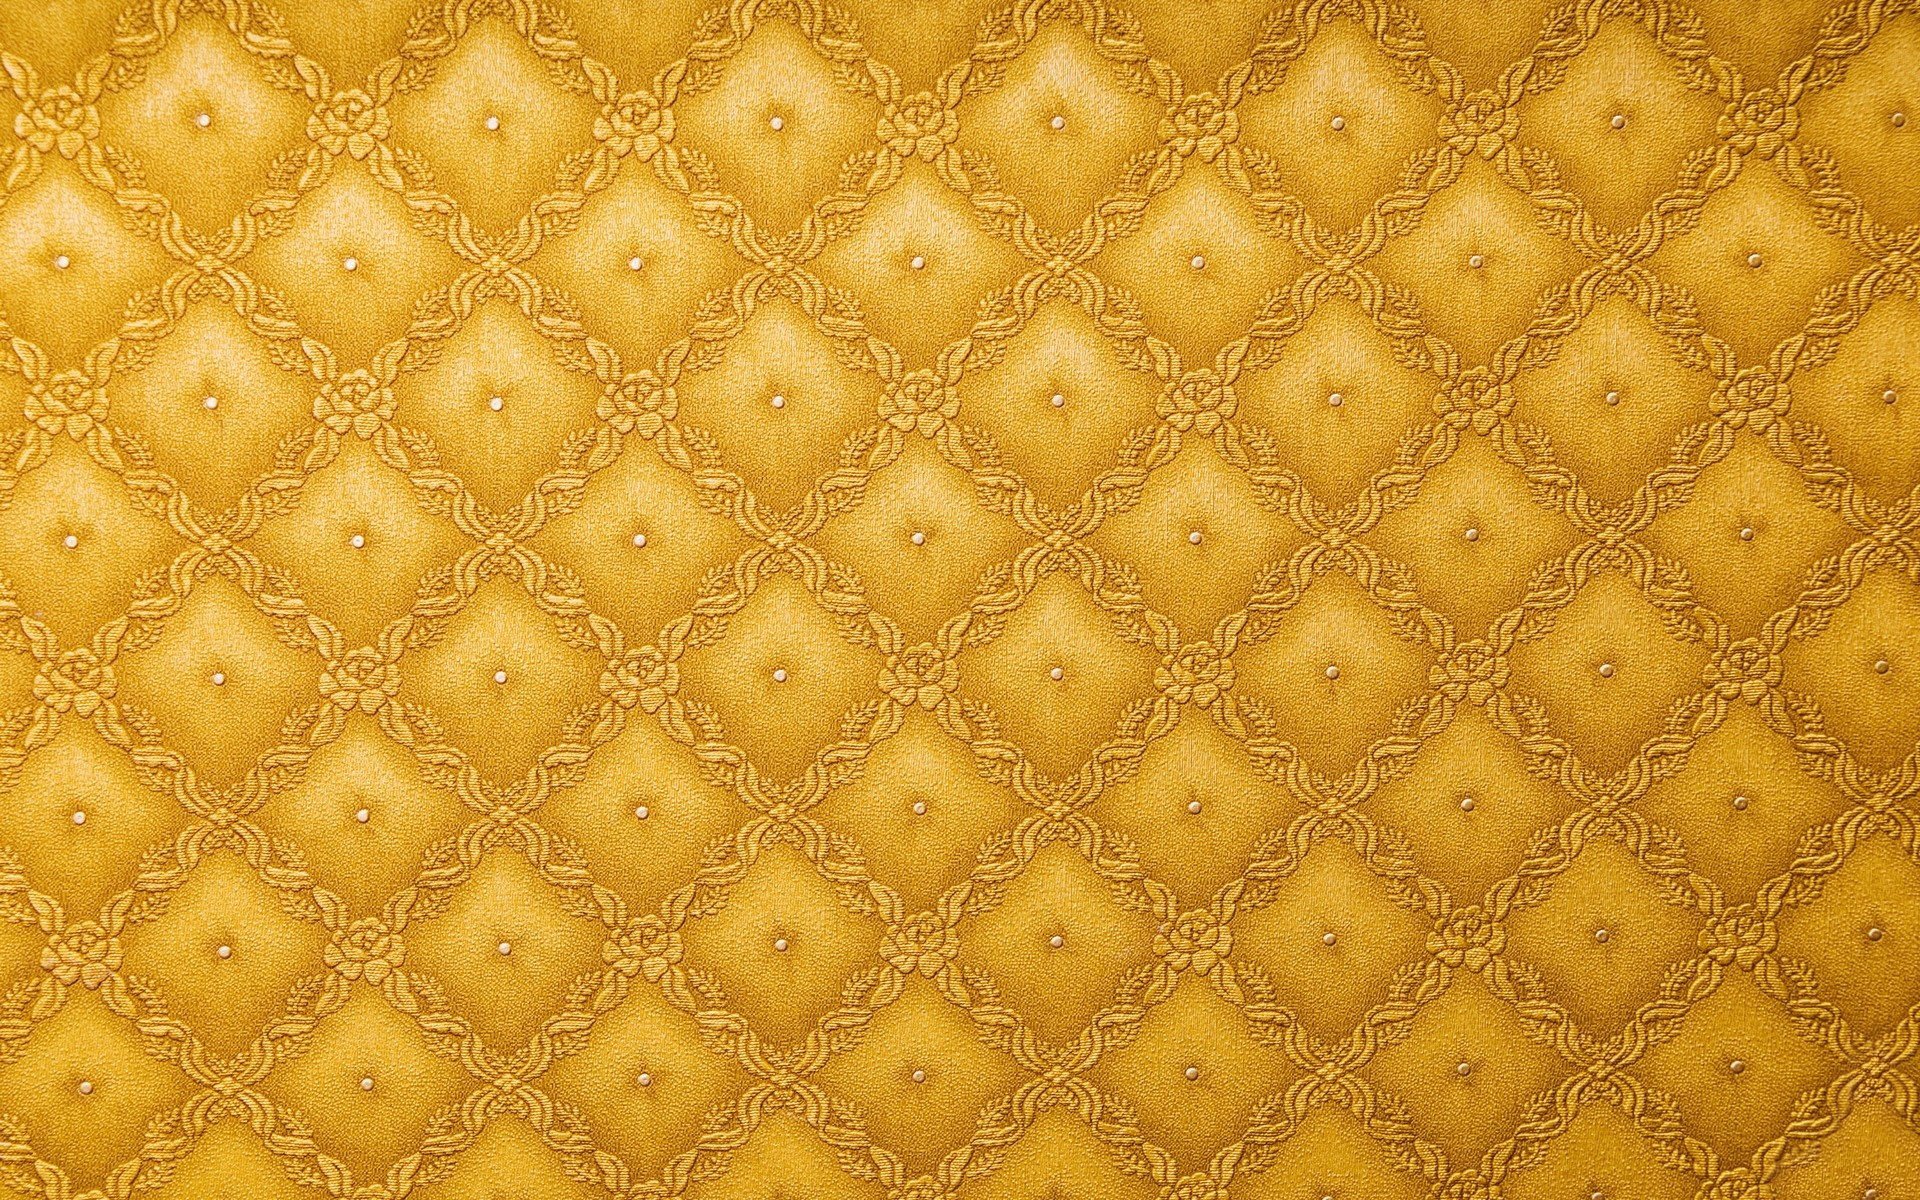 Download wallpapers yellow vintage background, vintage floral pattern,  yellow damask pattern, floral patterns, vintage backgrounds, yellow retro  backgrounds, floral vintage pattern for desktop with resolution 1920x1200.  High Quality HD pictures wallpapers